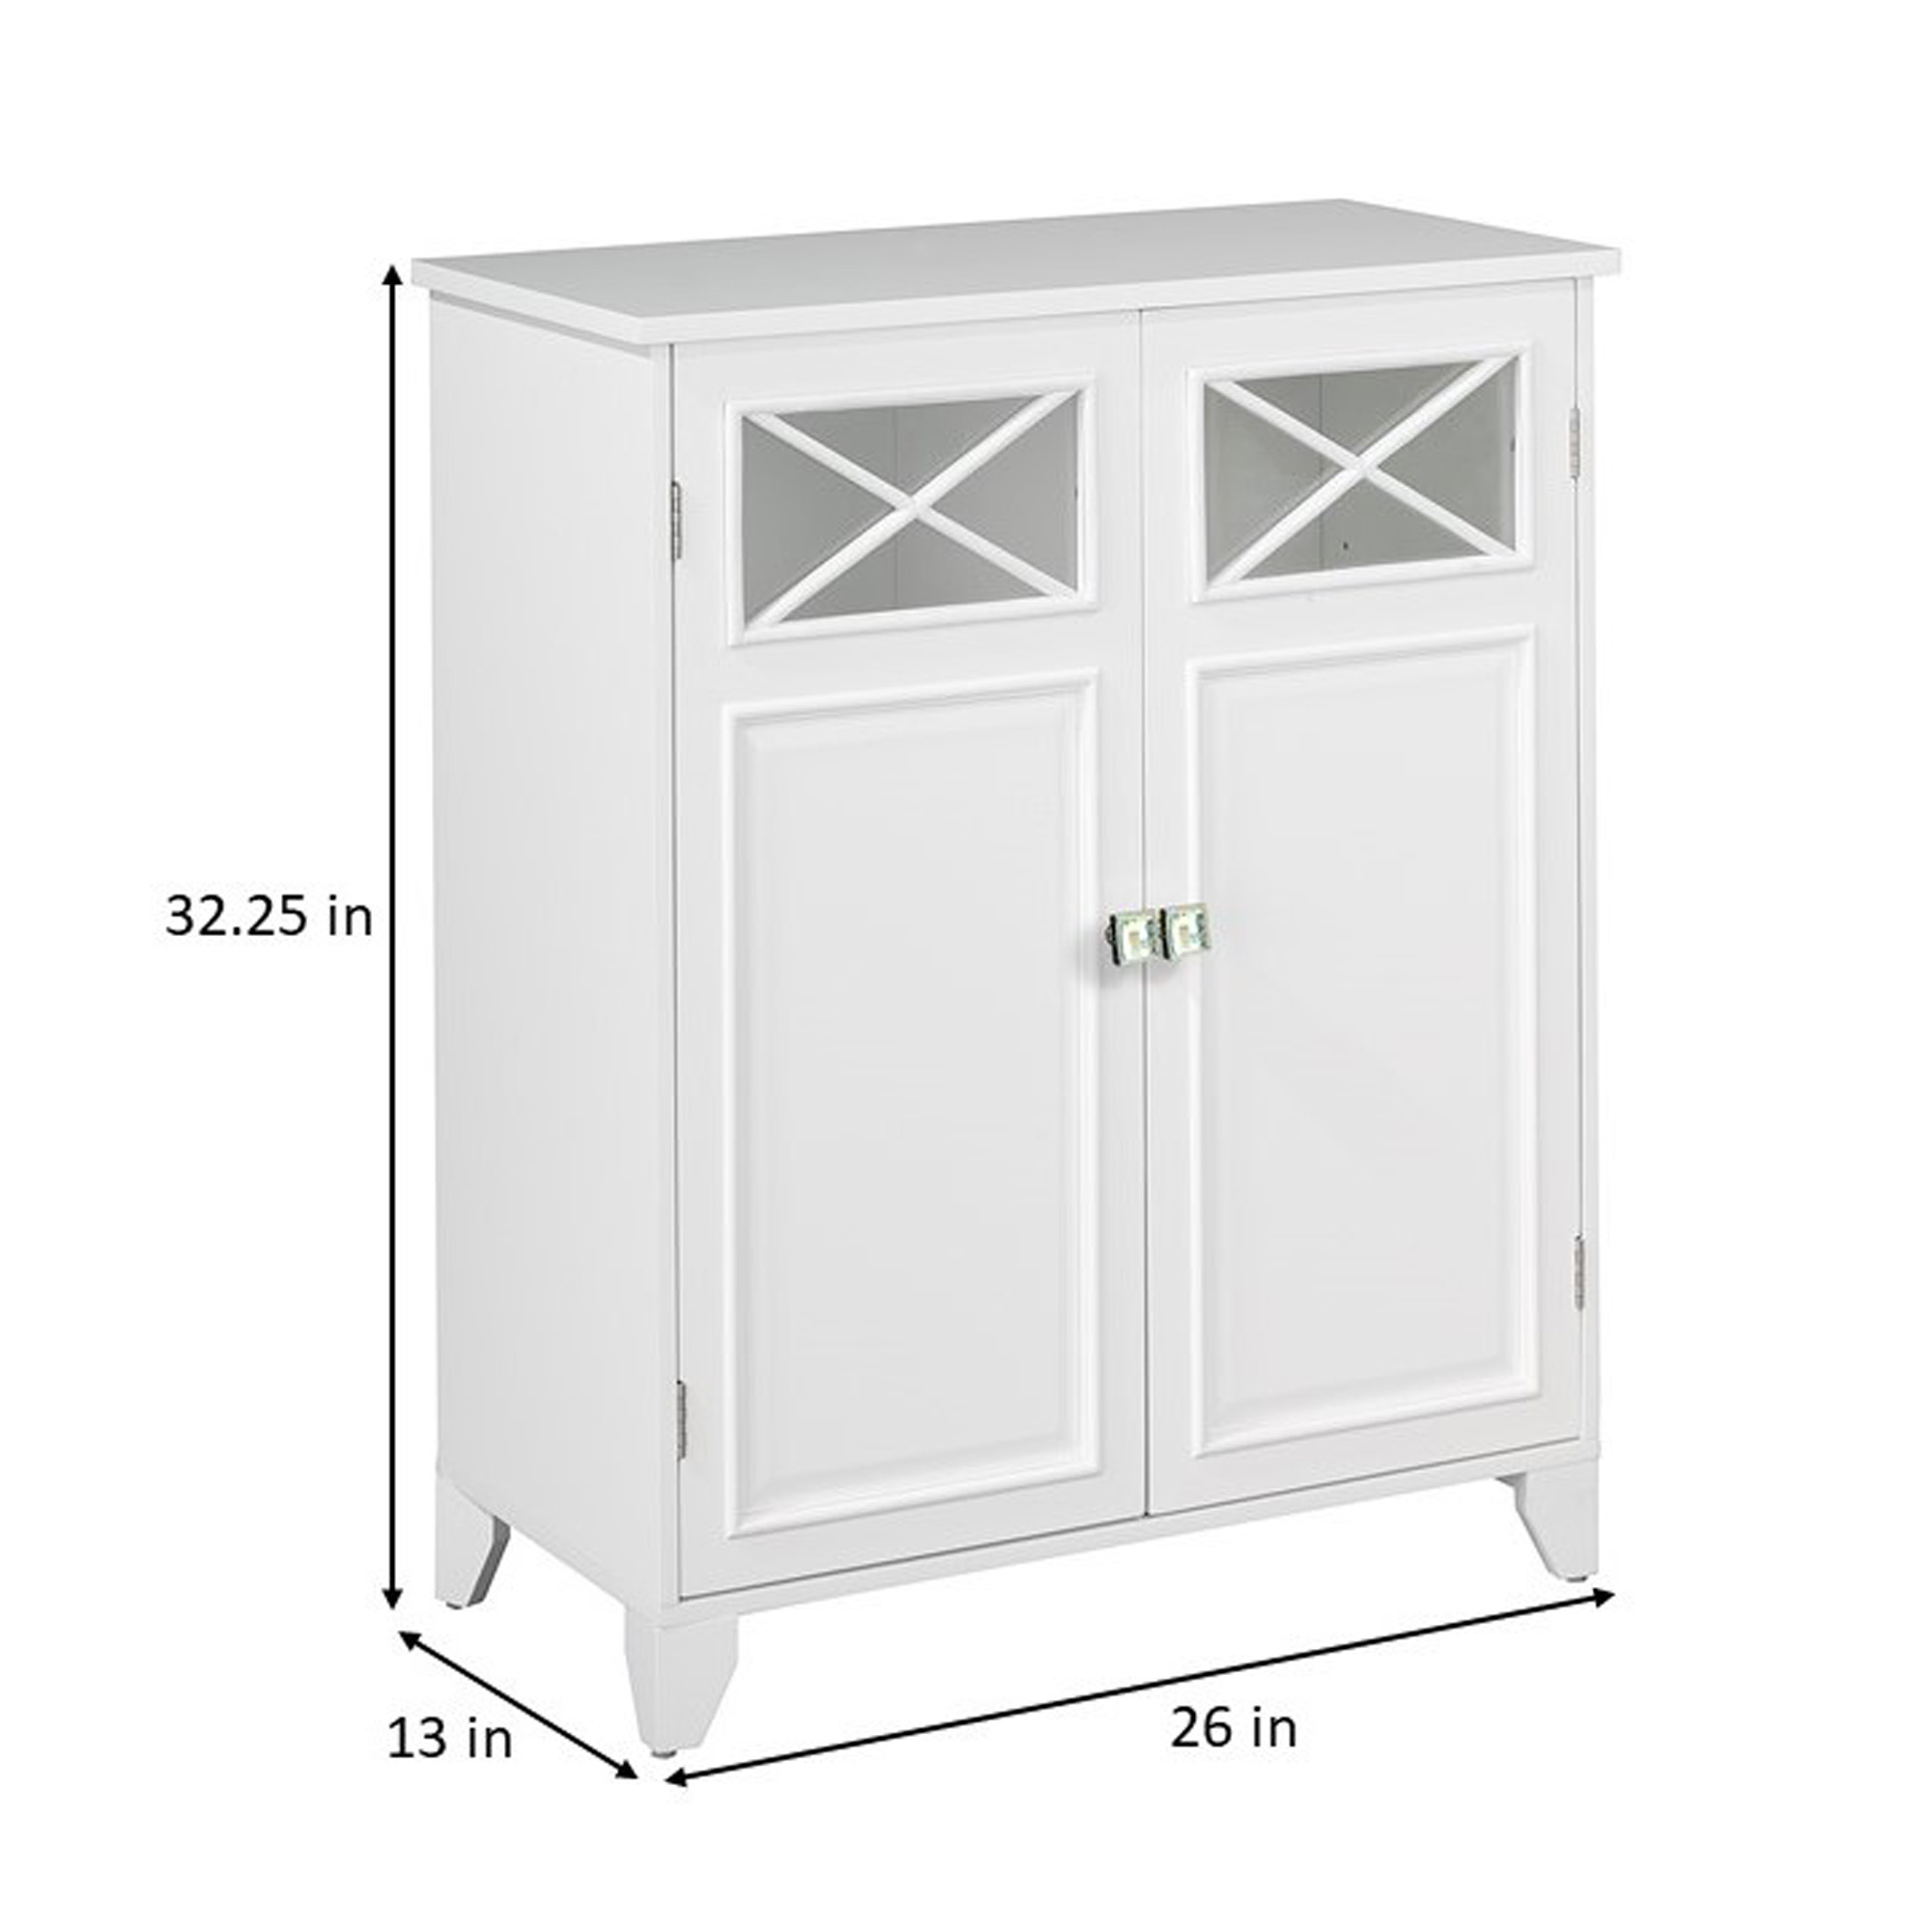 Teamson Home Dawson Wooden Floor Cabinet with Cross Molding and 2 Doors, White - image 4 of 9